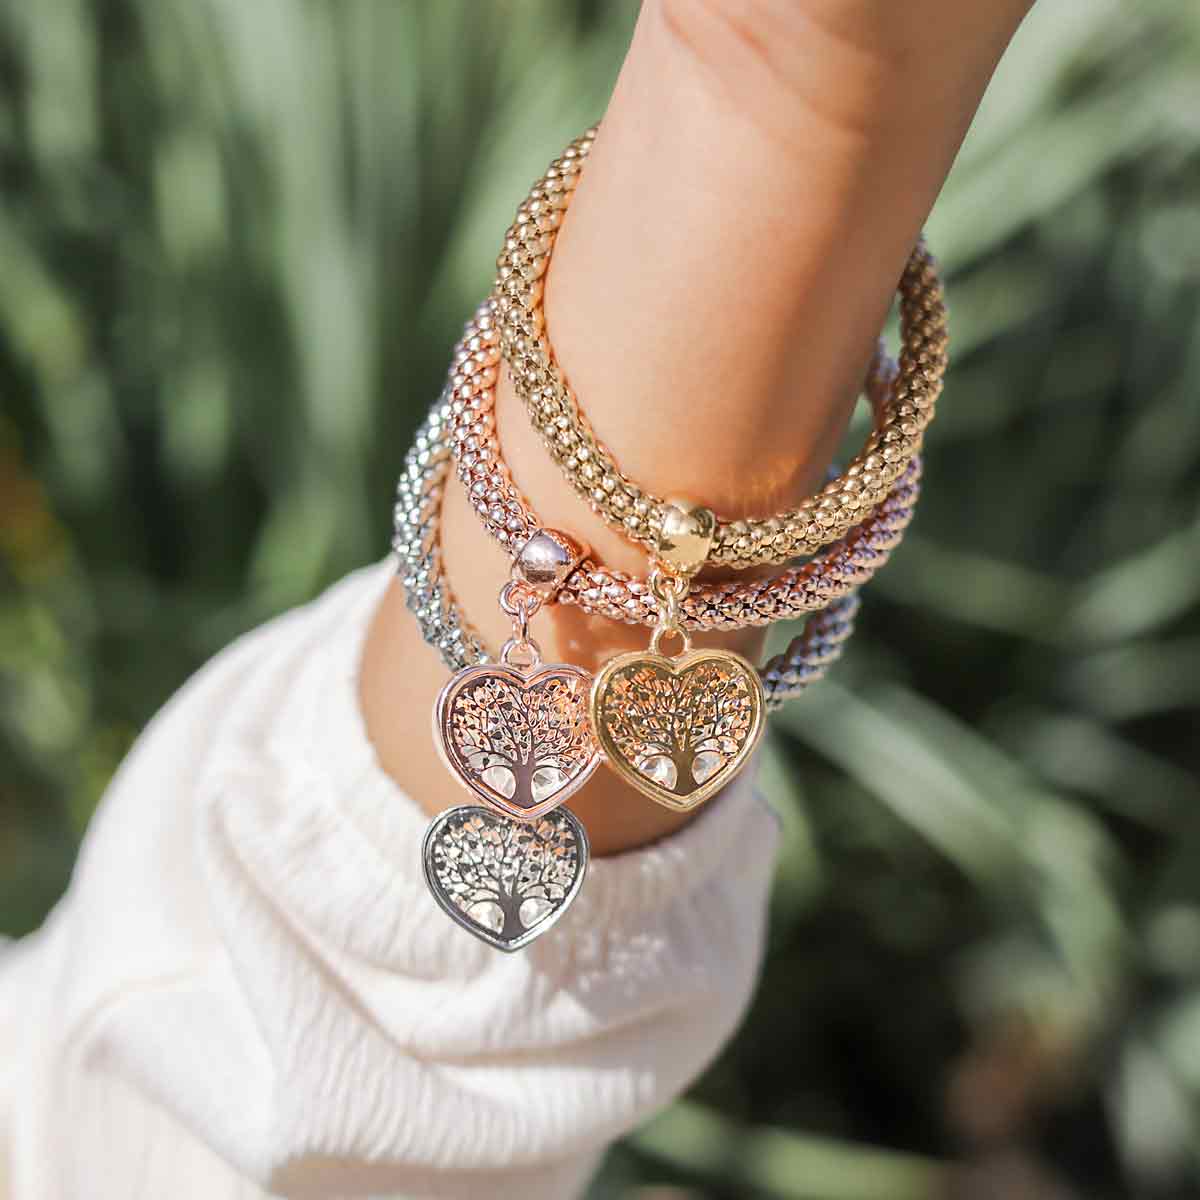 BUY 1, GET 2 FREE Tree of Life Heart Edition Charm Bracelet with Real Austrian Crystals